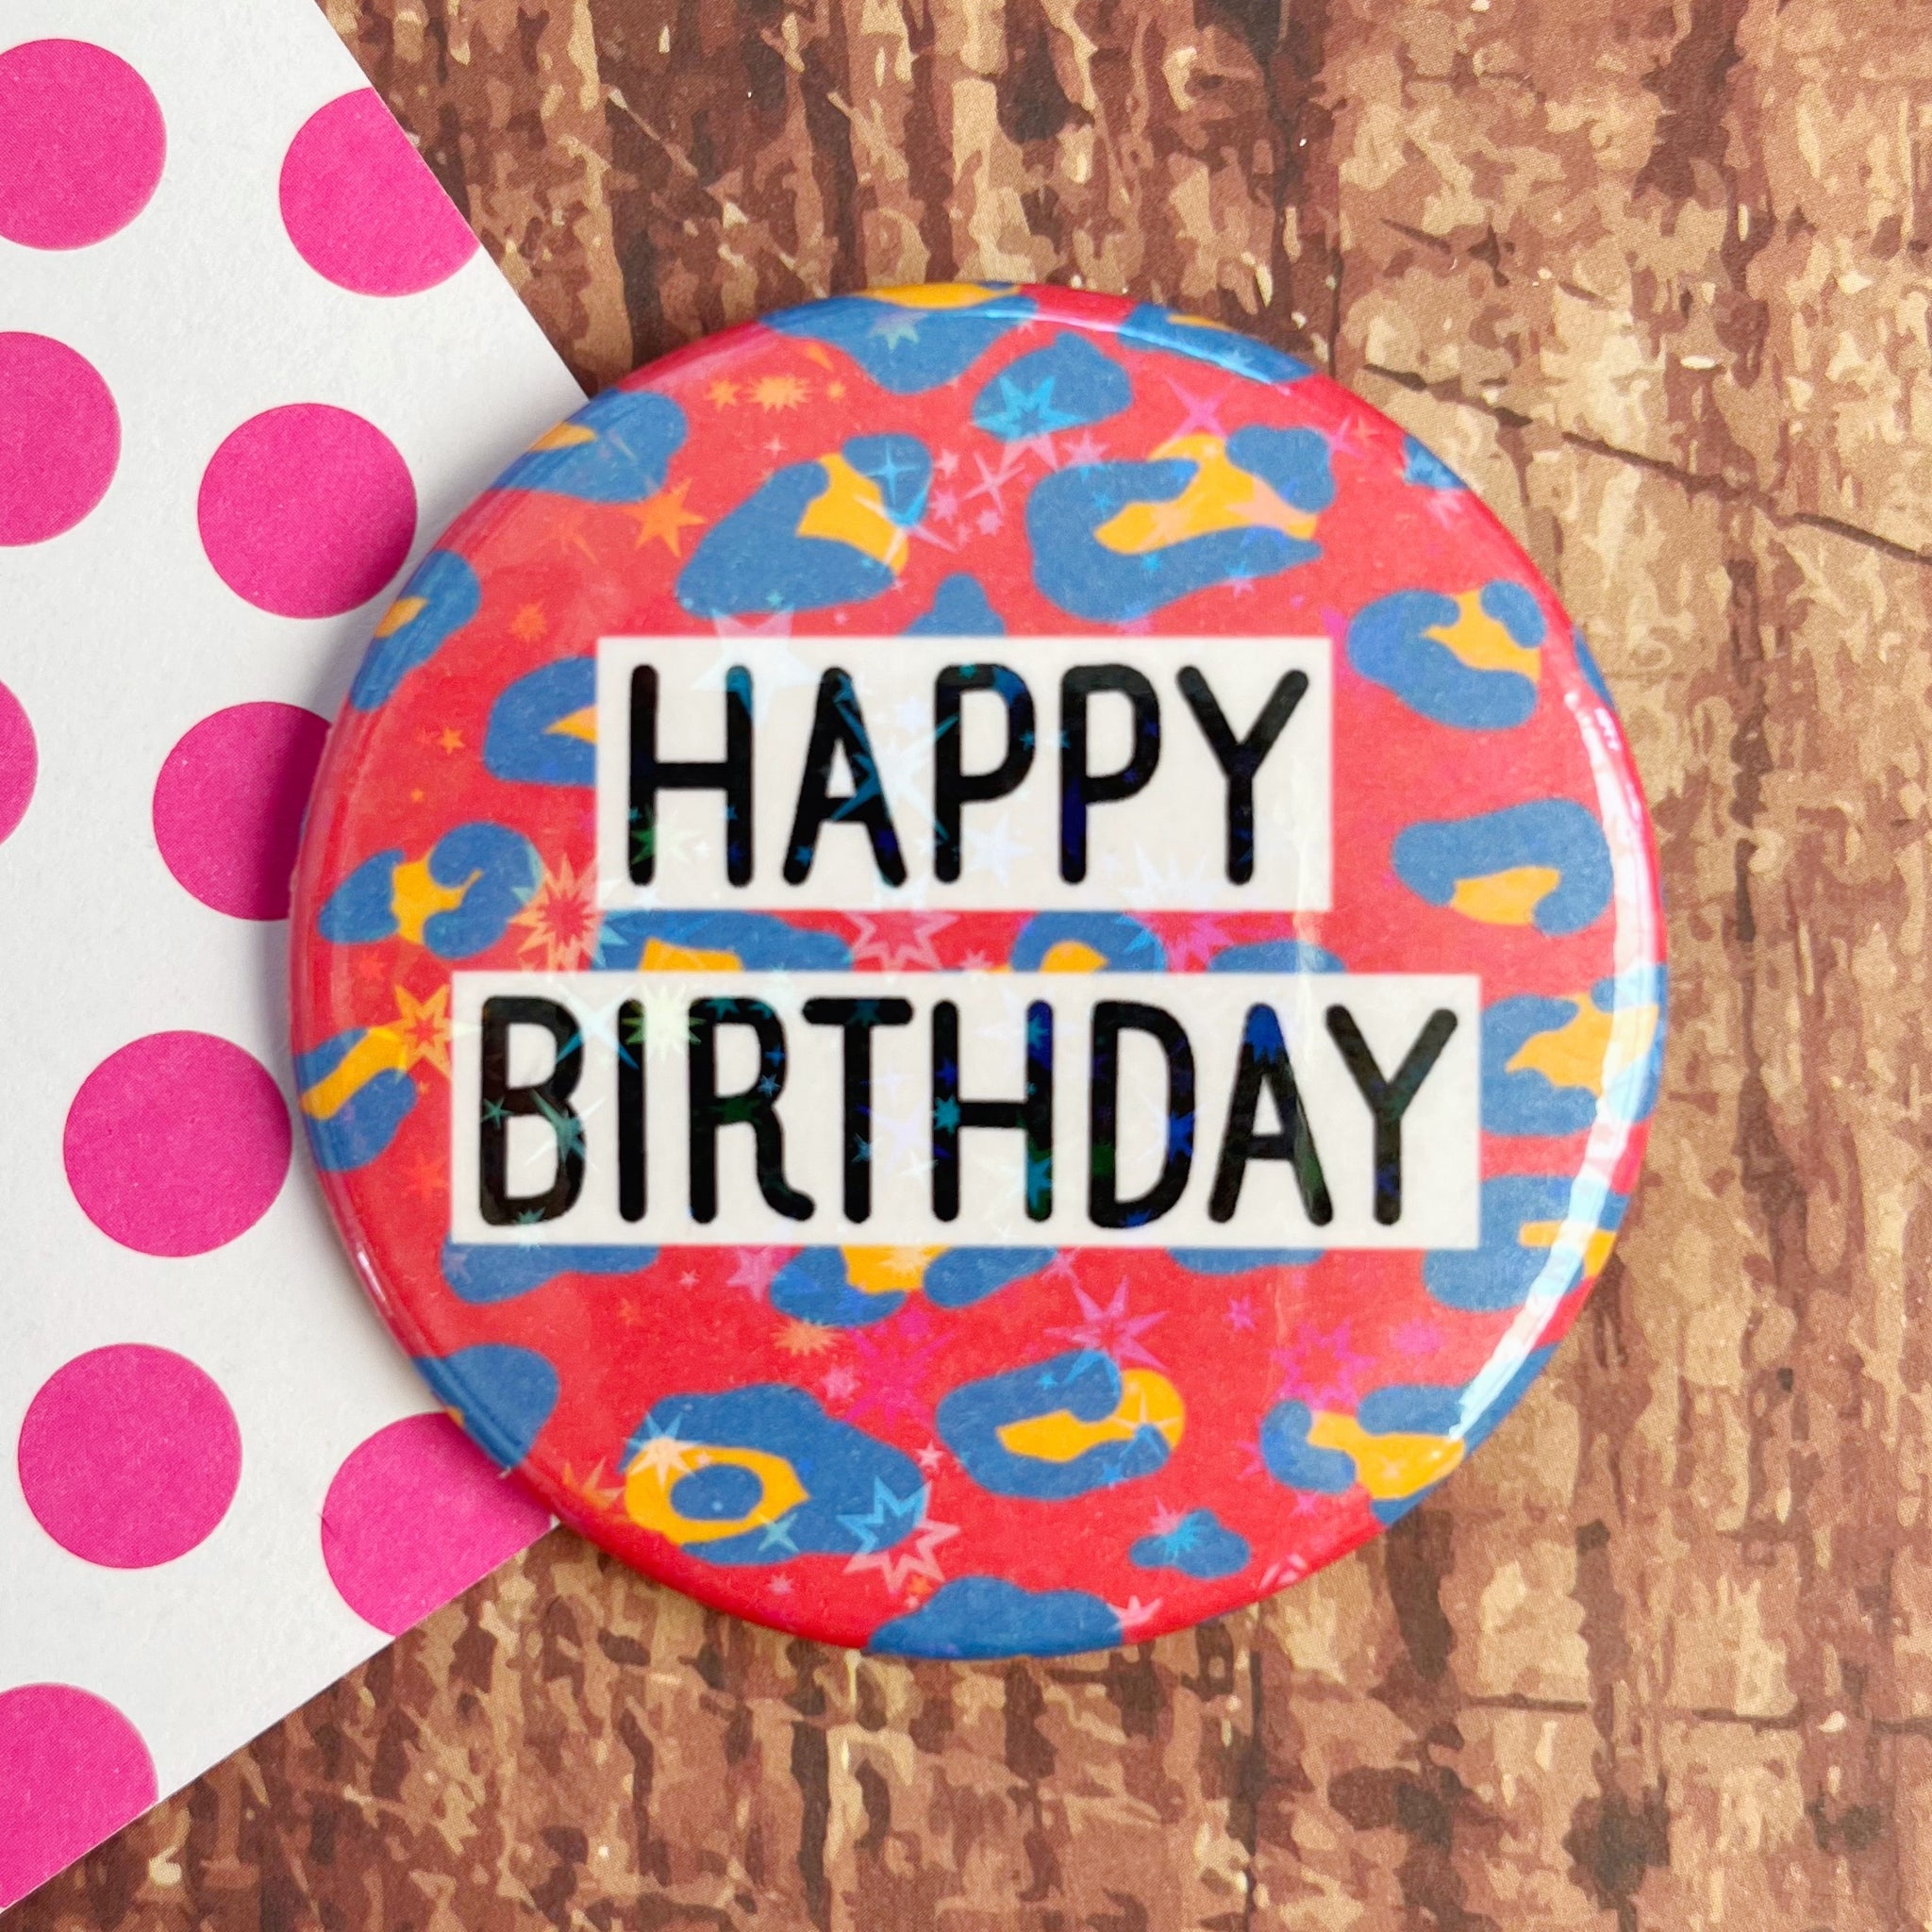 Happy Birthday Leopard Print Holographic Button Badge